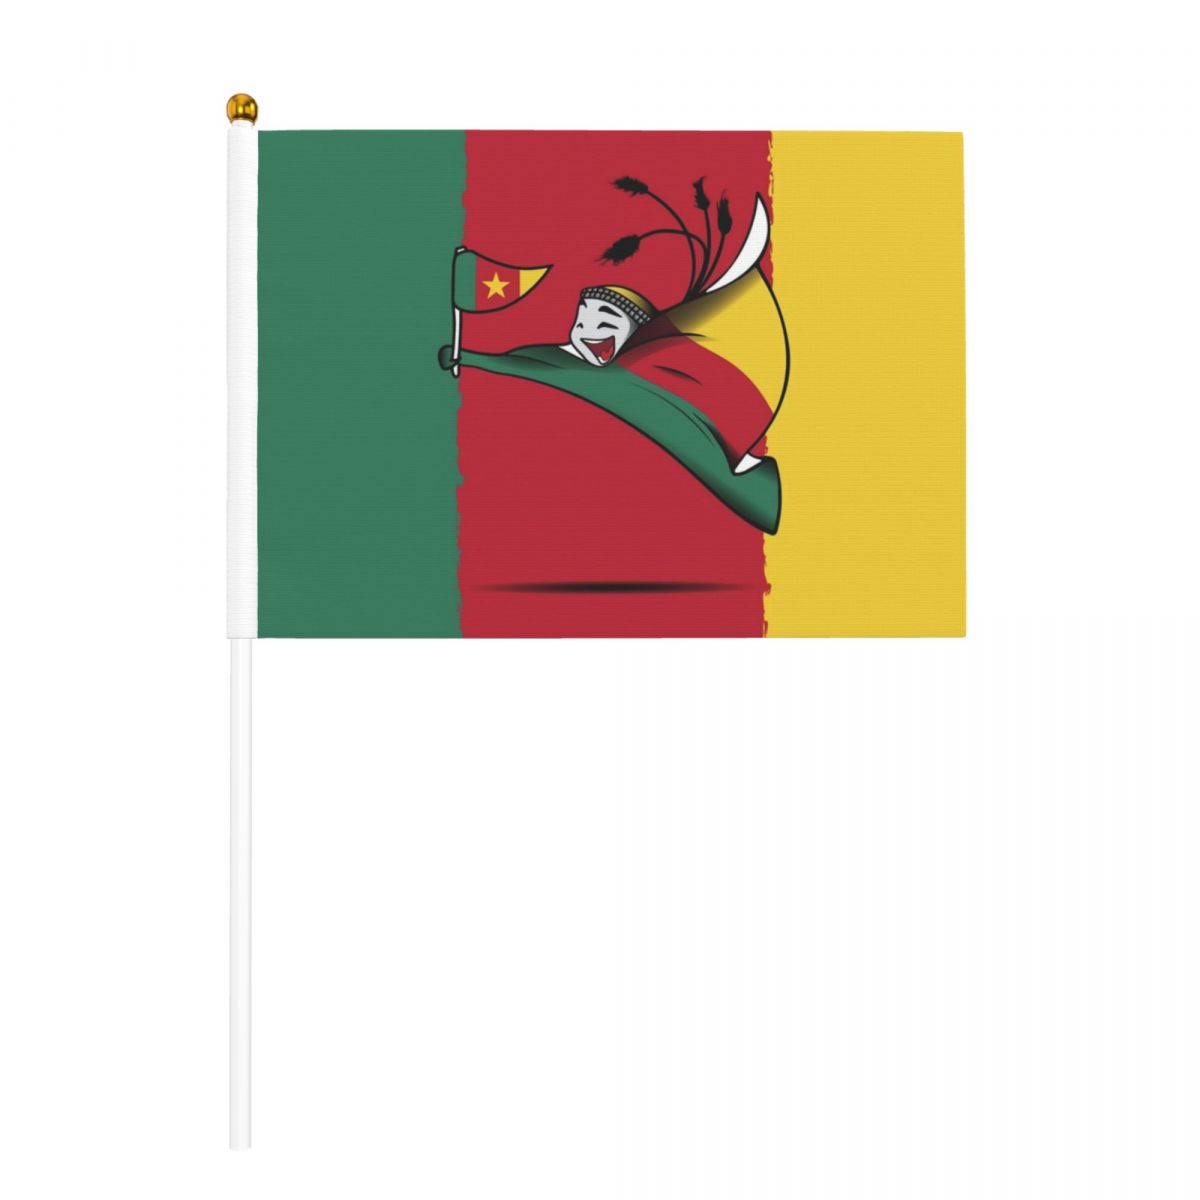 Cameroon World Cup 2022 Mascot Hand Held Small Miniature Flags on Stick